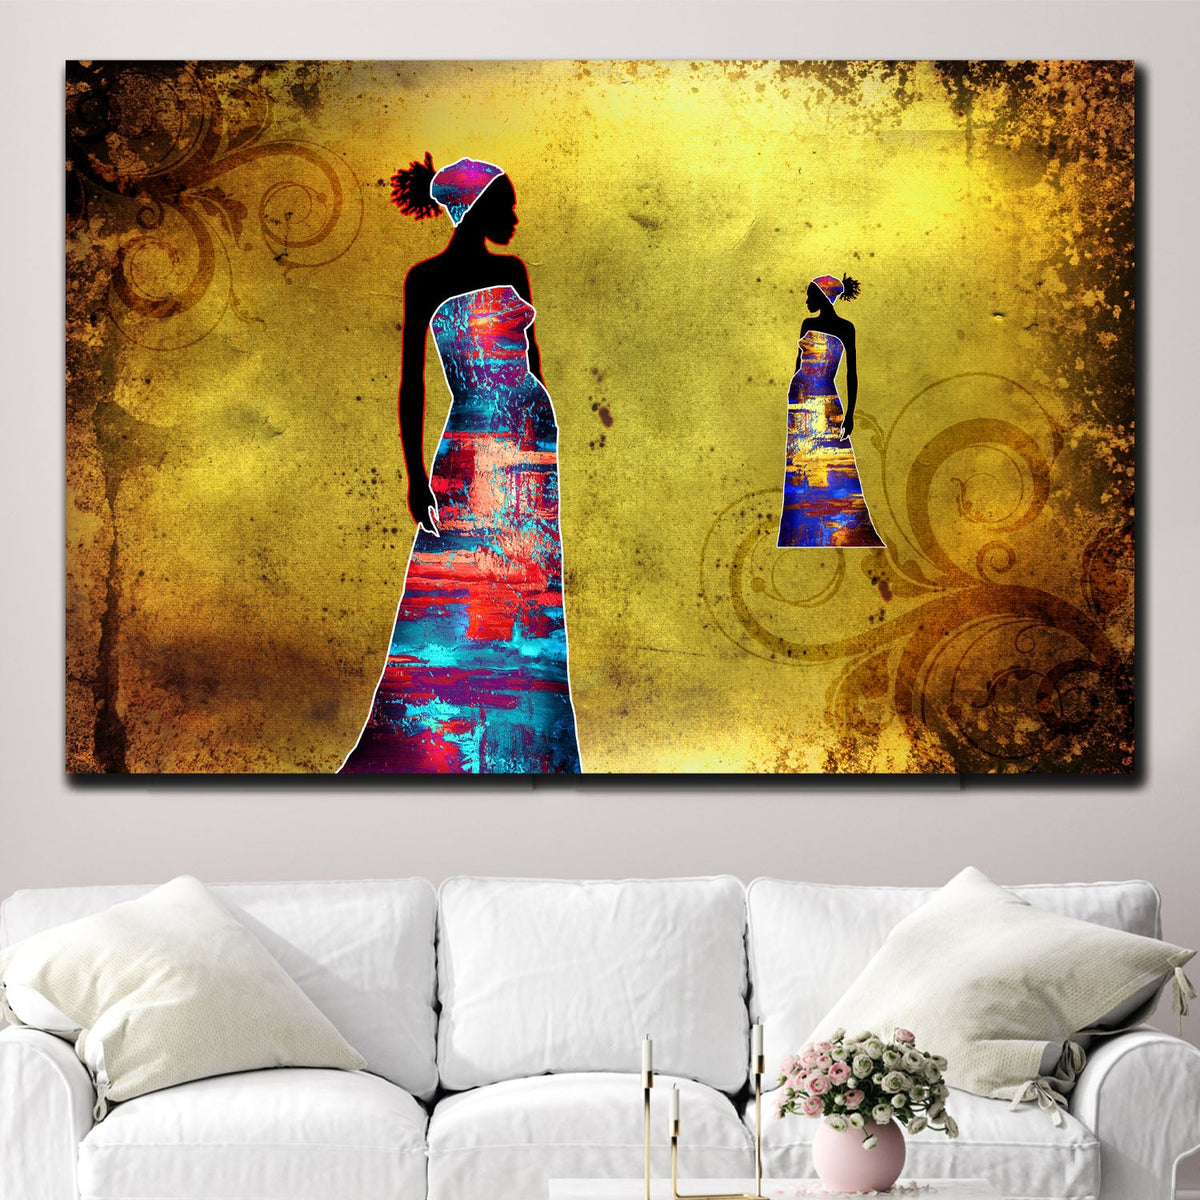 https://cdn.shopify.com/s/files/1/0387/9986/8044/products/AfricanEthnicWomanCanvasArtprintStretched-4.jpg